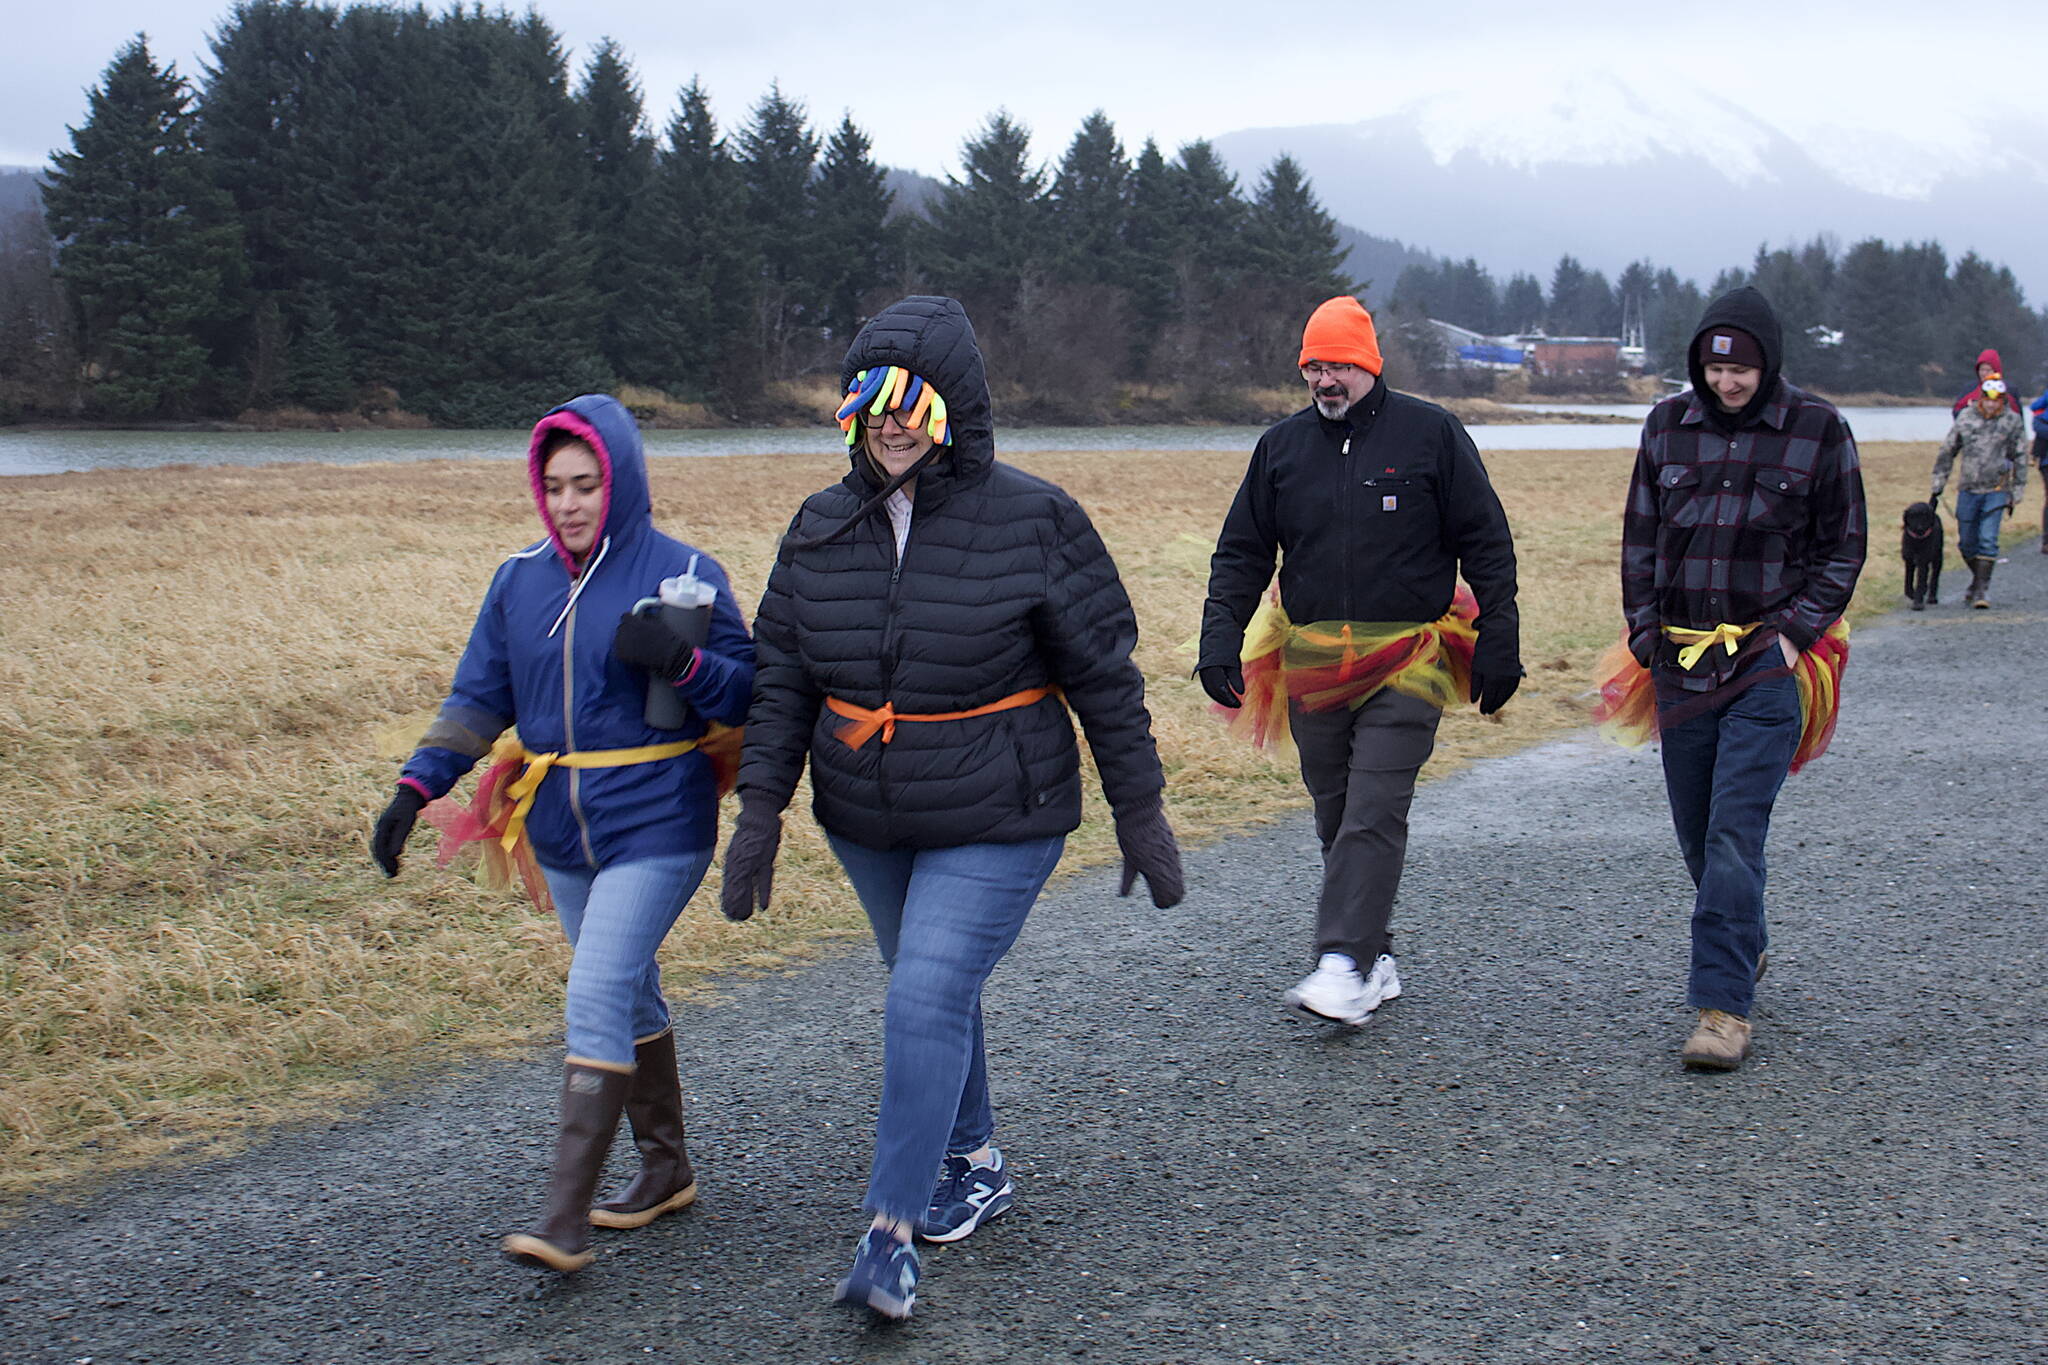 Tristan Baker (center), a Seattle resident who traditionally visits family in Juneau for Thanksgiving, walks with some of them while wearing turkey tutus she provided during the during the annual Turkey Trot 5K and 1 Mile Fun Run along the Airport Dike Trail on Thursday morning. (Mark Sabbatini / Juneau Empire)